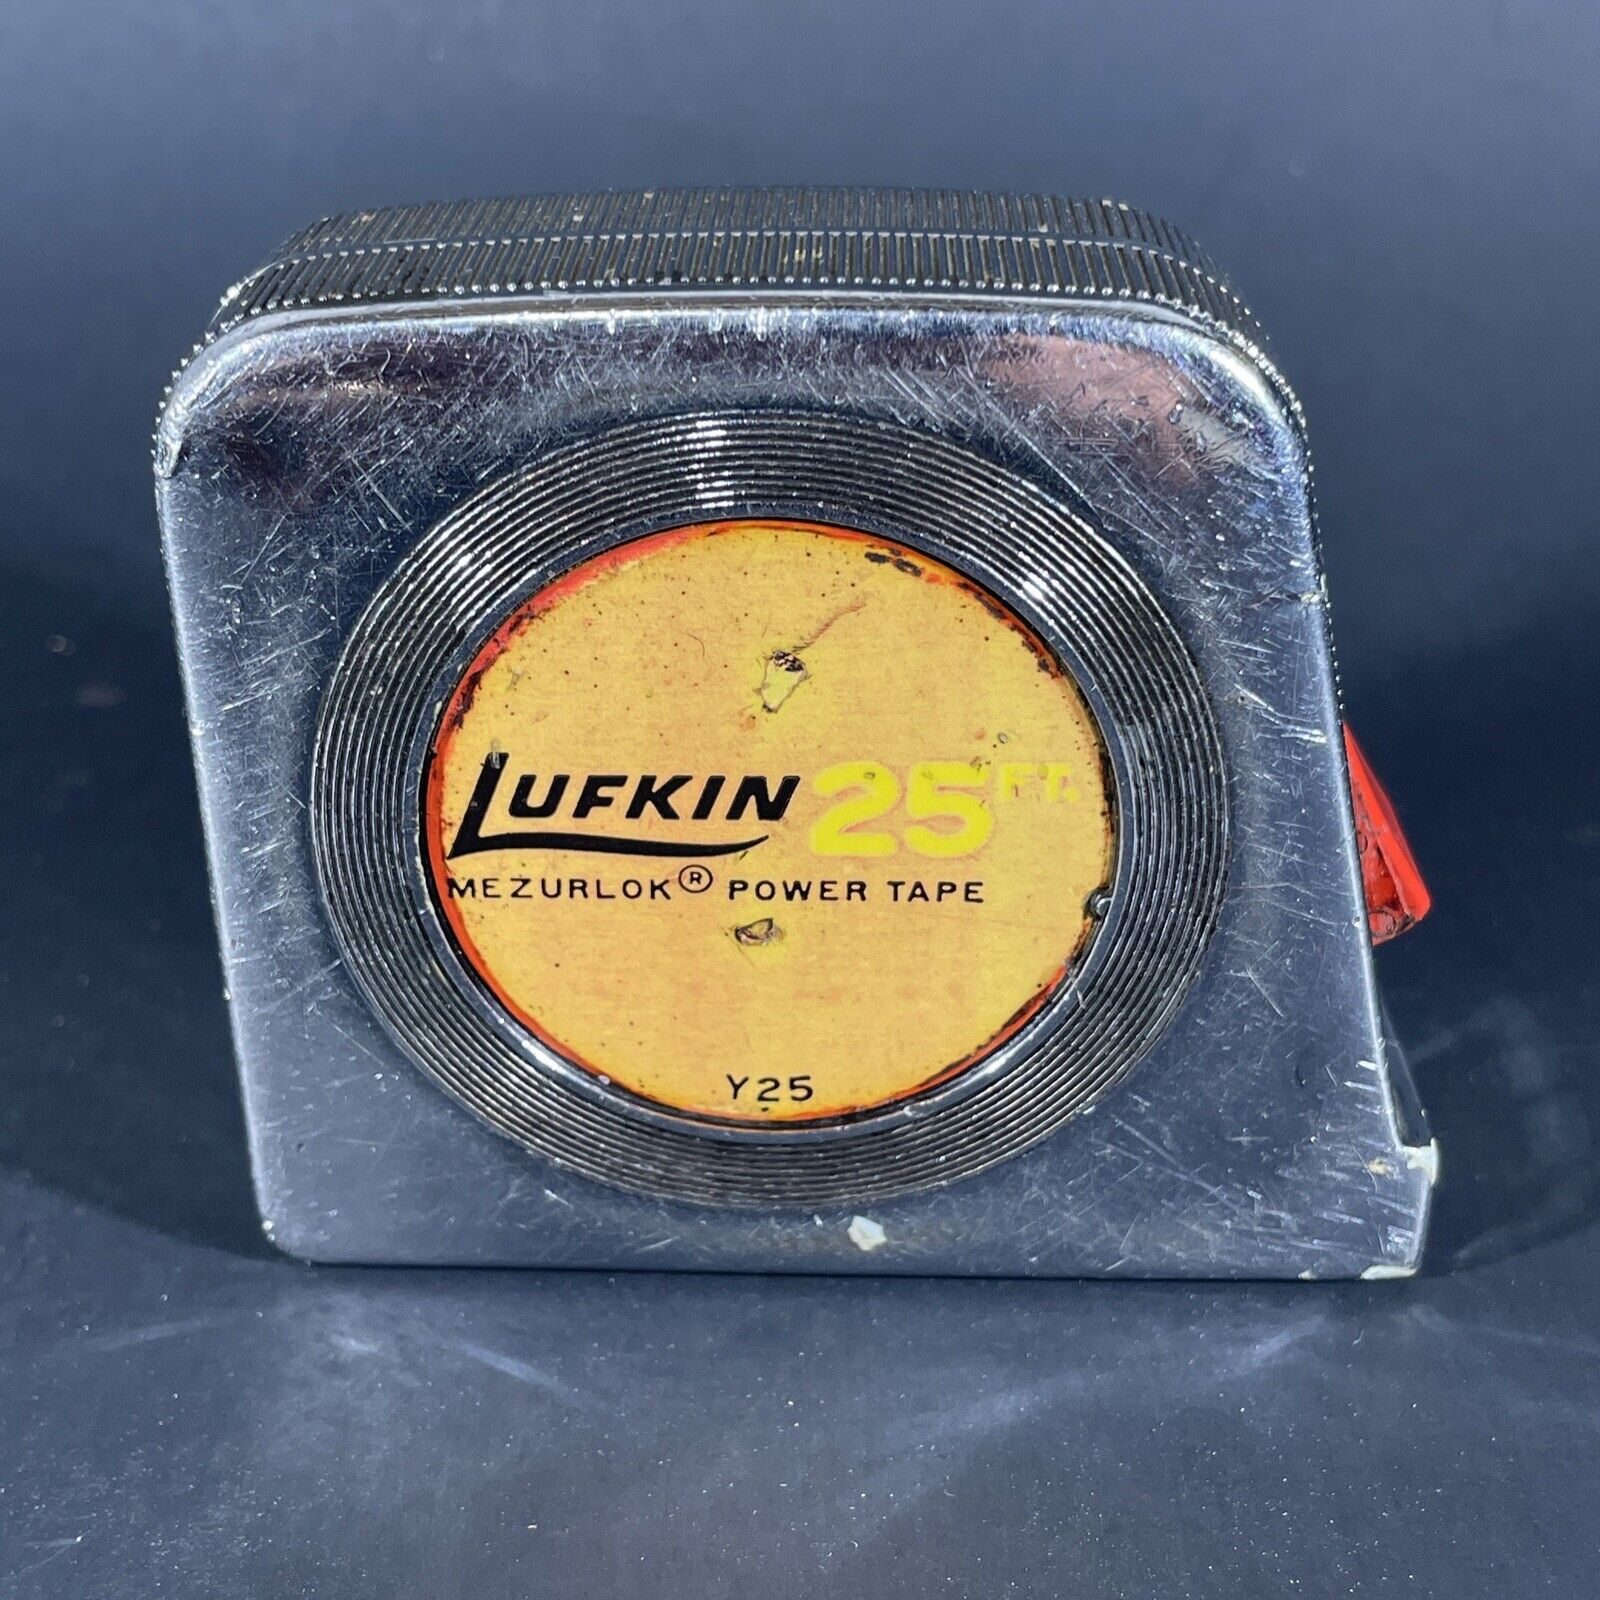 Vintage Lufkin Y25 25 Ft Tape Measure Made in USA Chrome Colored Plastic Case